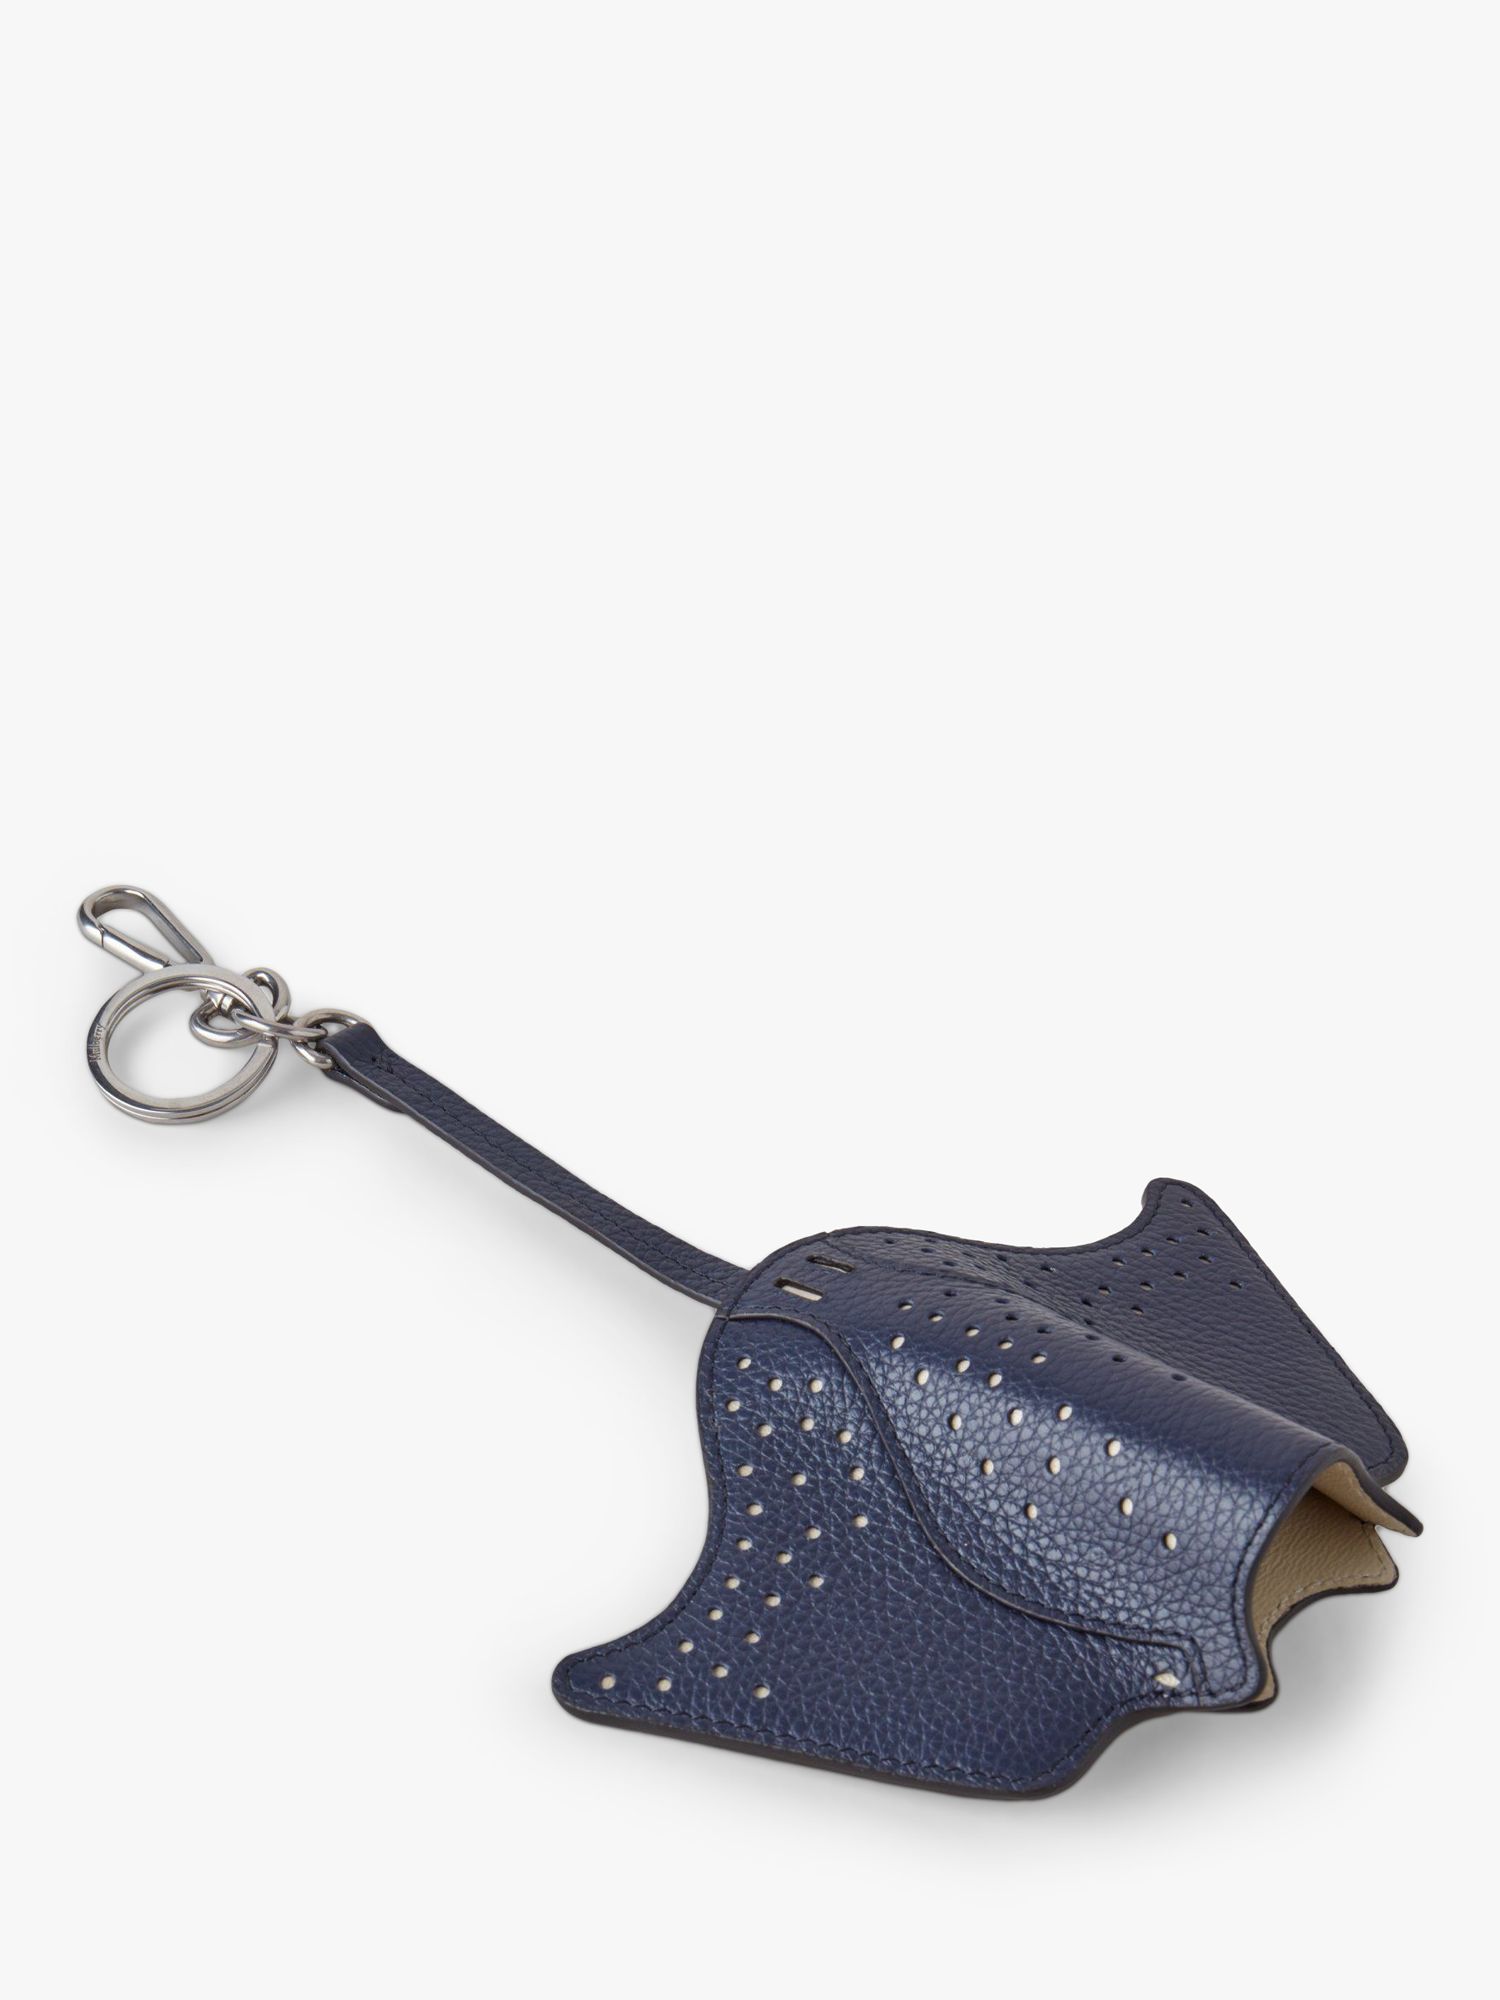 Mulberry Manta Ray Leather Keyring, Oxford Blue